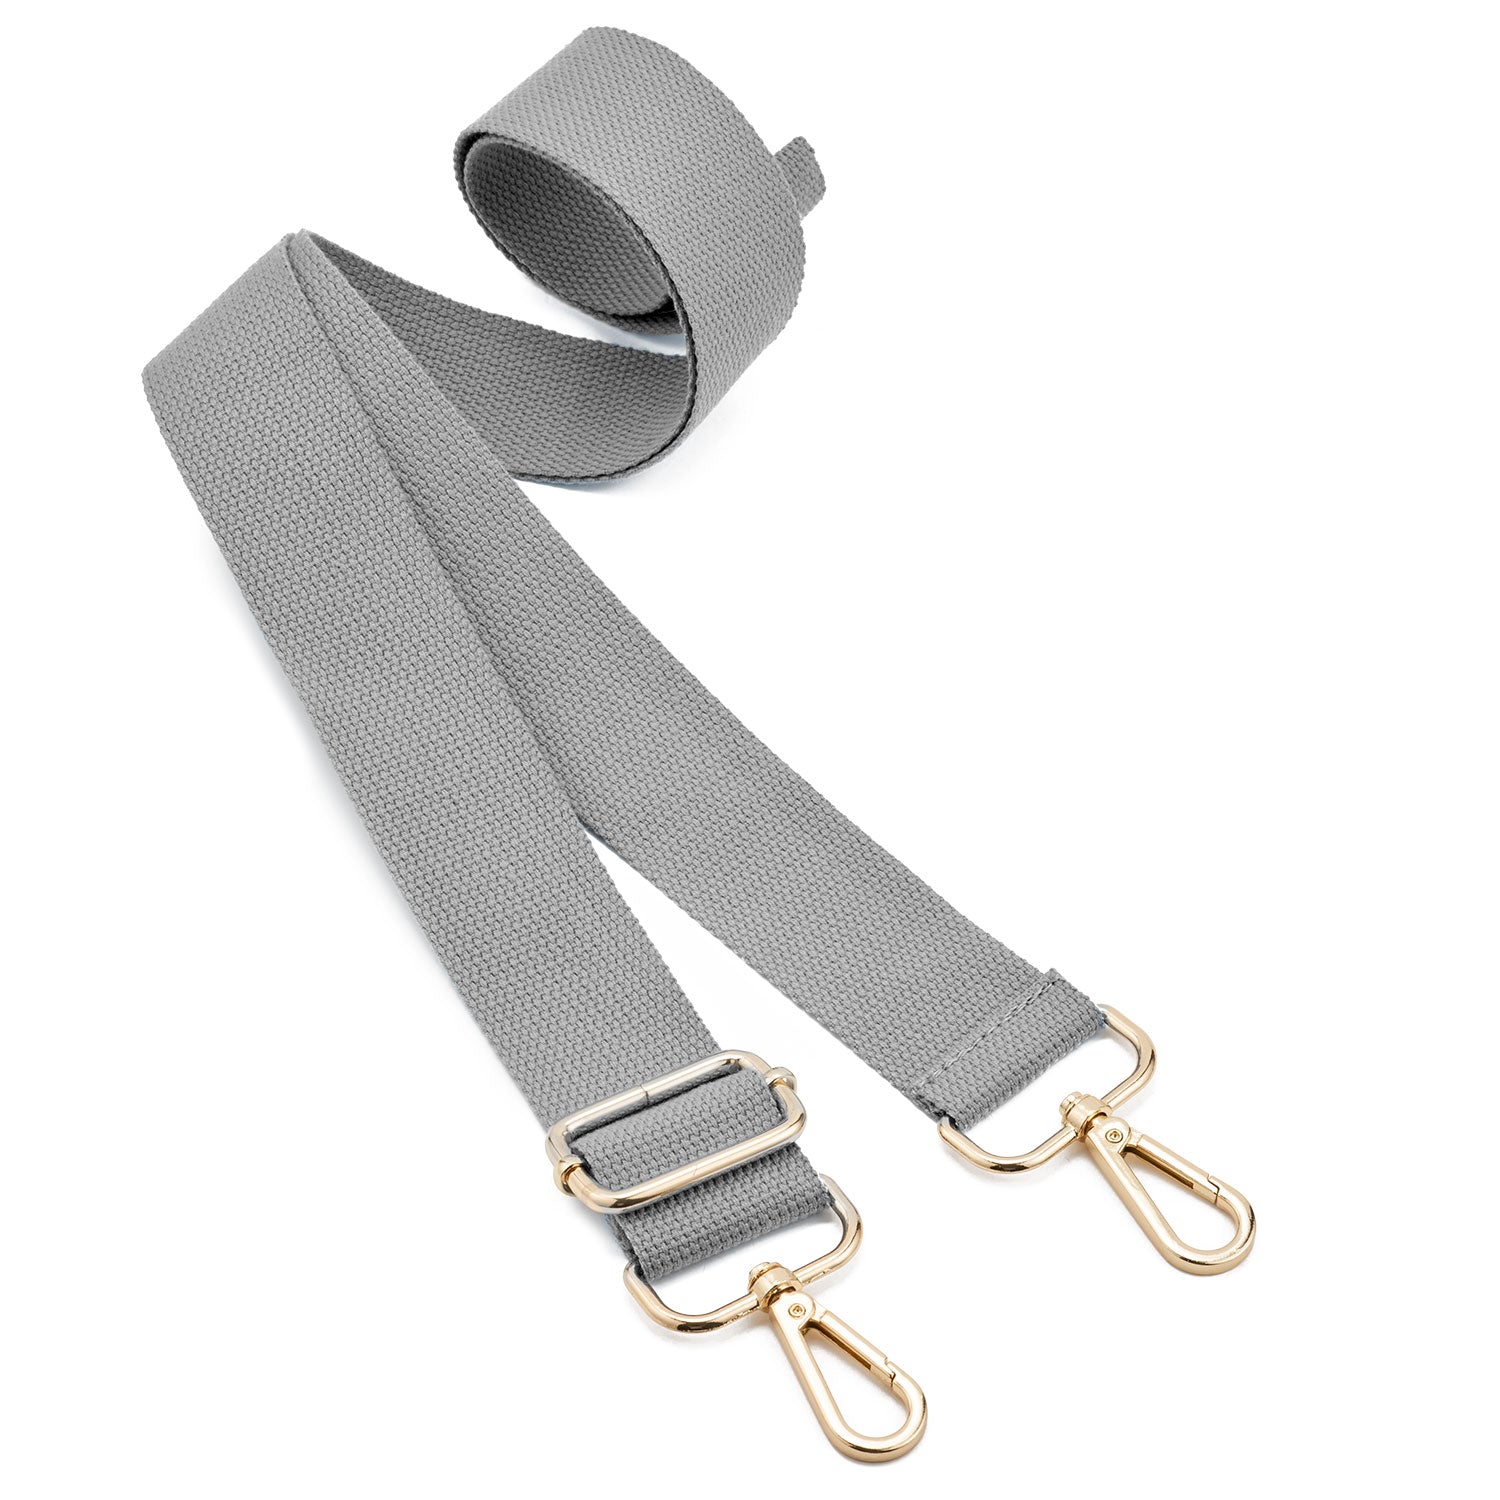  Purse Strap Silver Hardware Wide Bag Straps Replacement  Crossbody Adjustable Shoulder Strap for Purses Canvas Tote Handbags… :  Arts, Crafts & Sewing